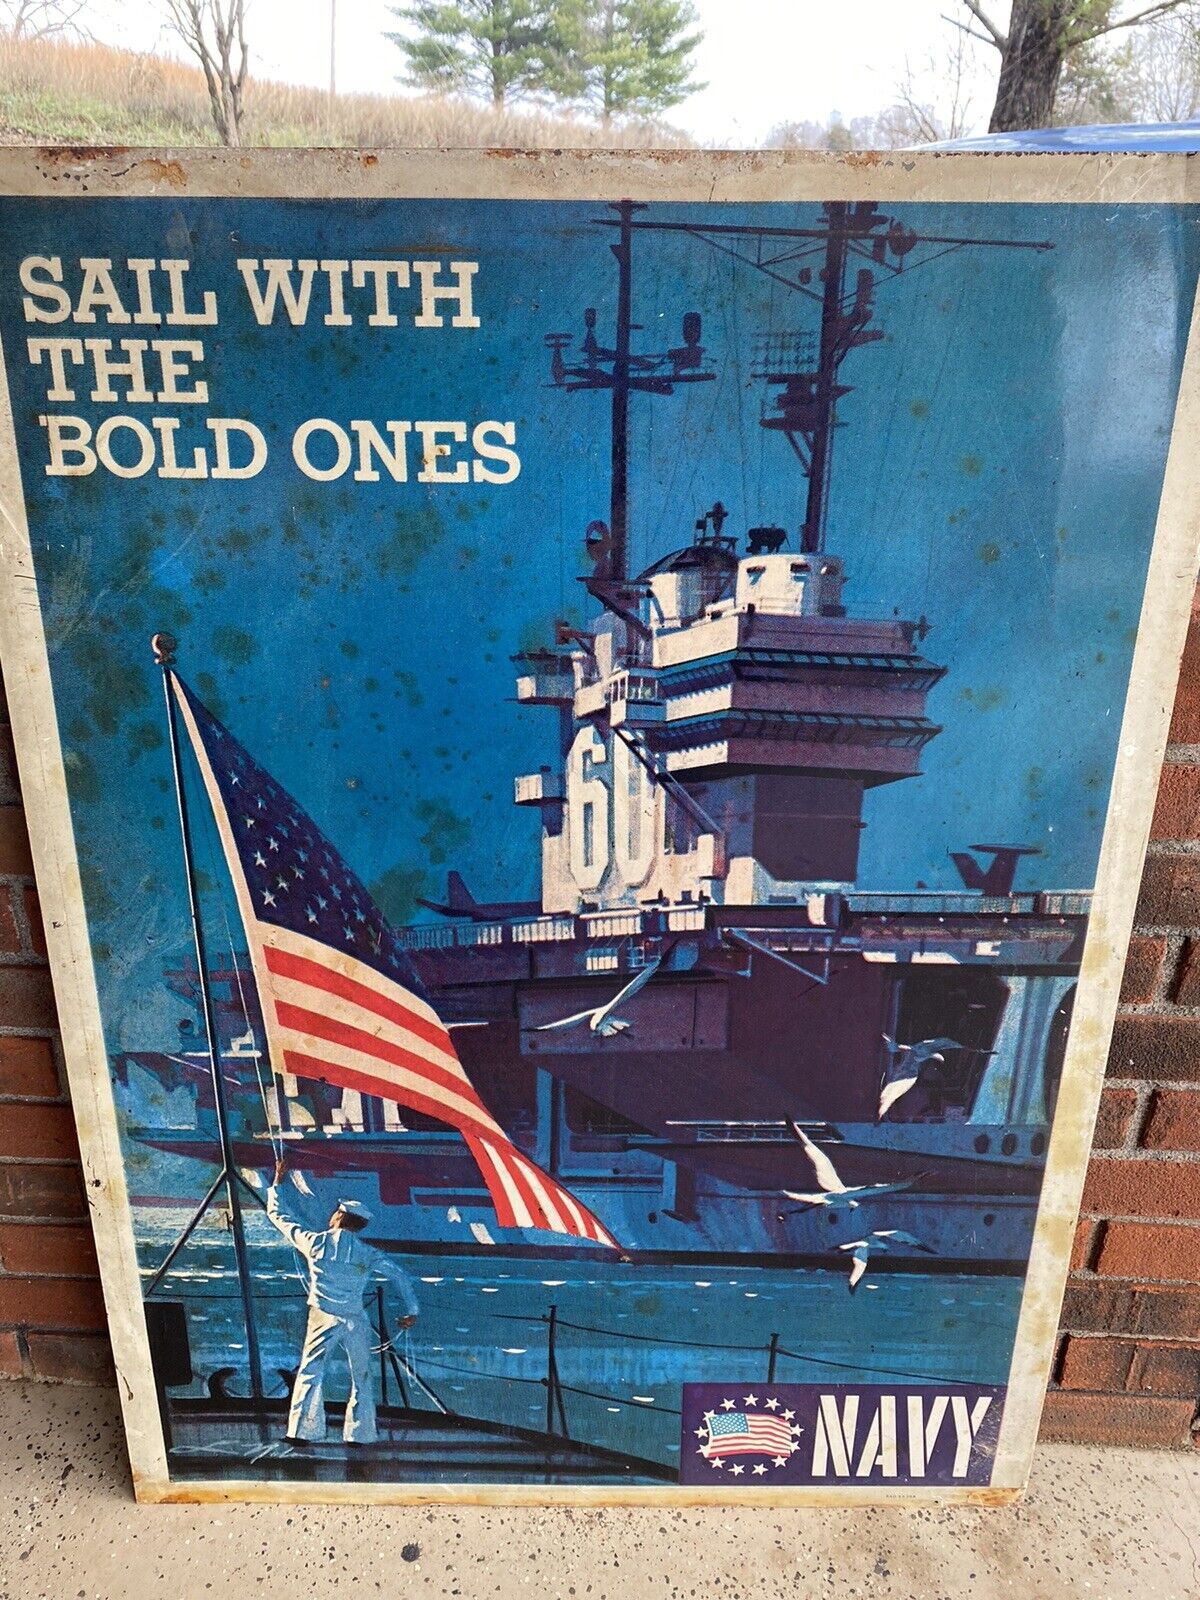 RARE VINTAGE VIETNAM ERA LARGE METAL NAVY RECRUITING DOUBLE SIDED SIGN 1966 ⚓️